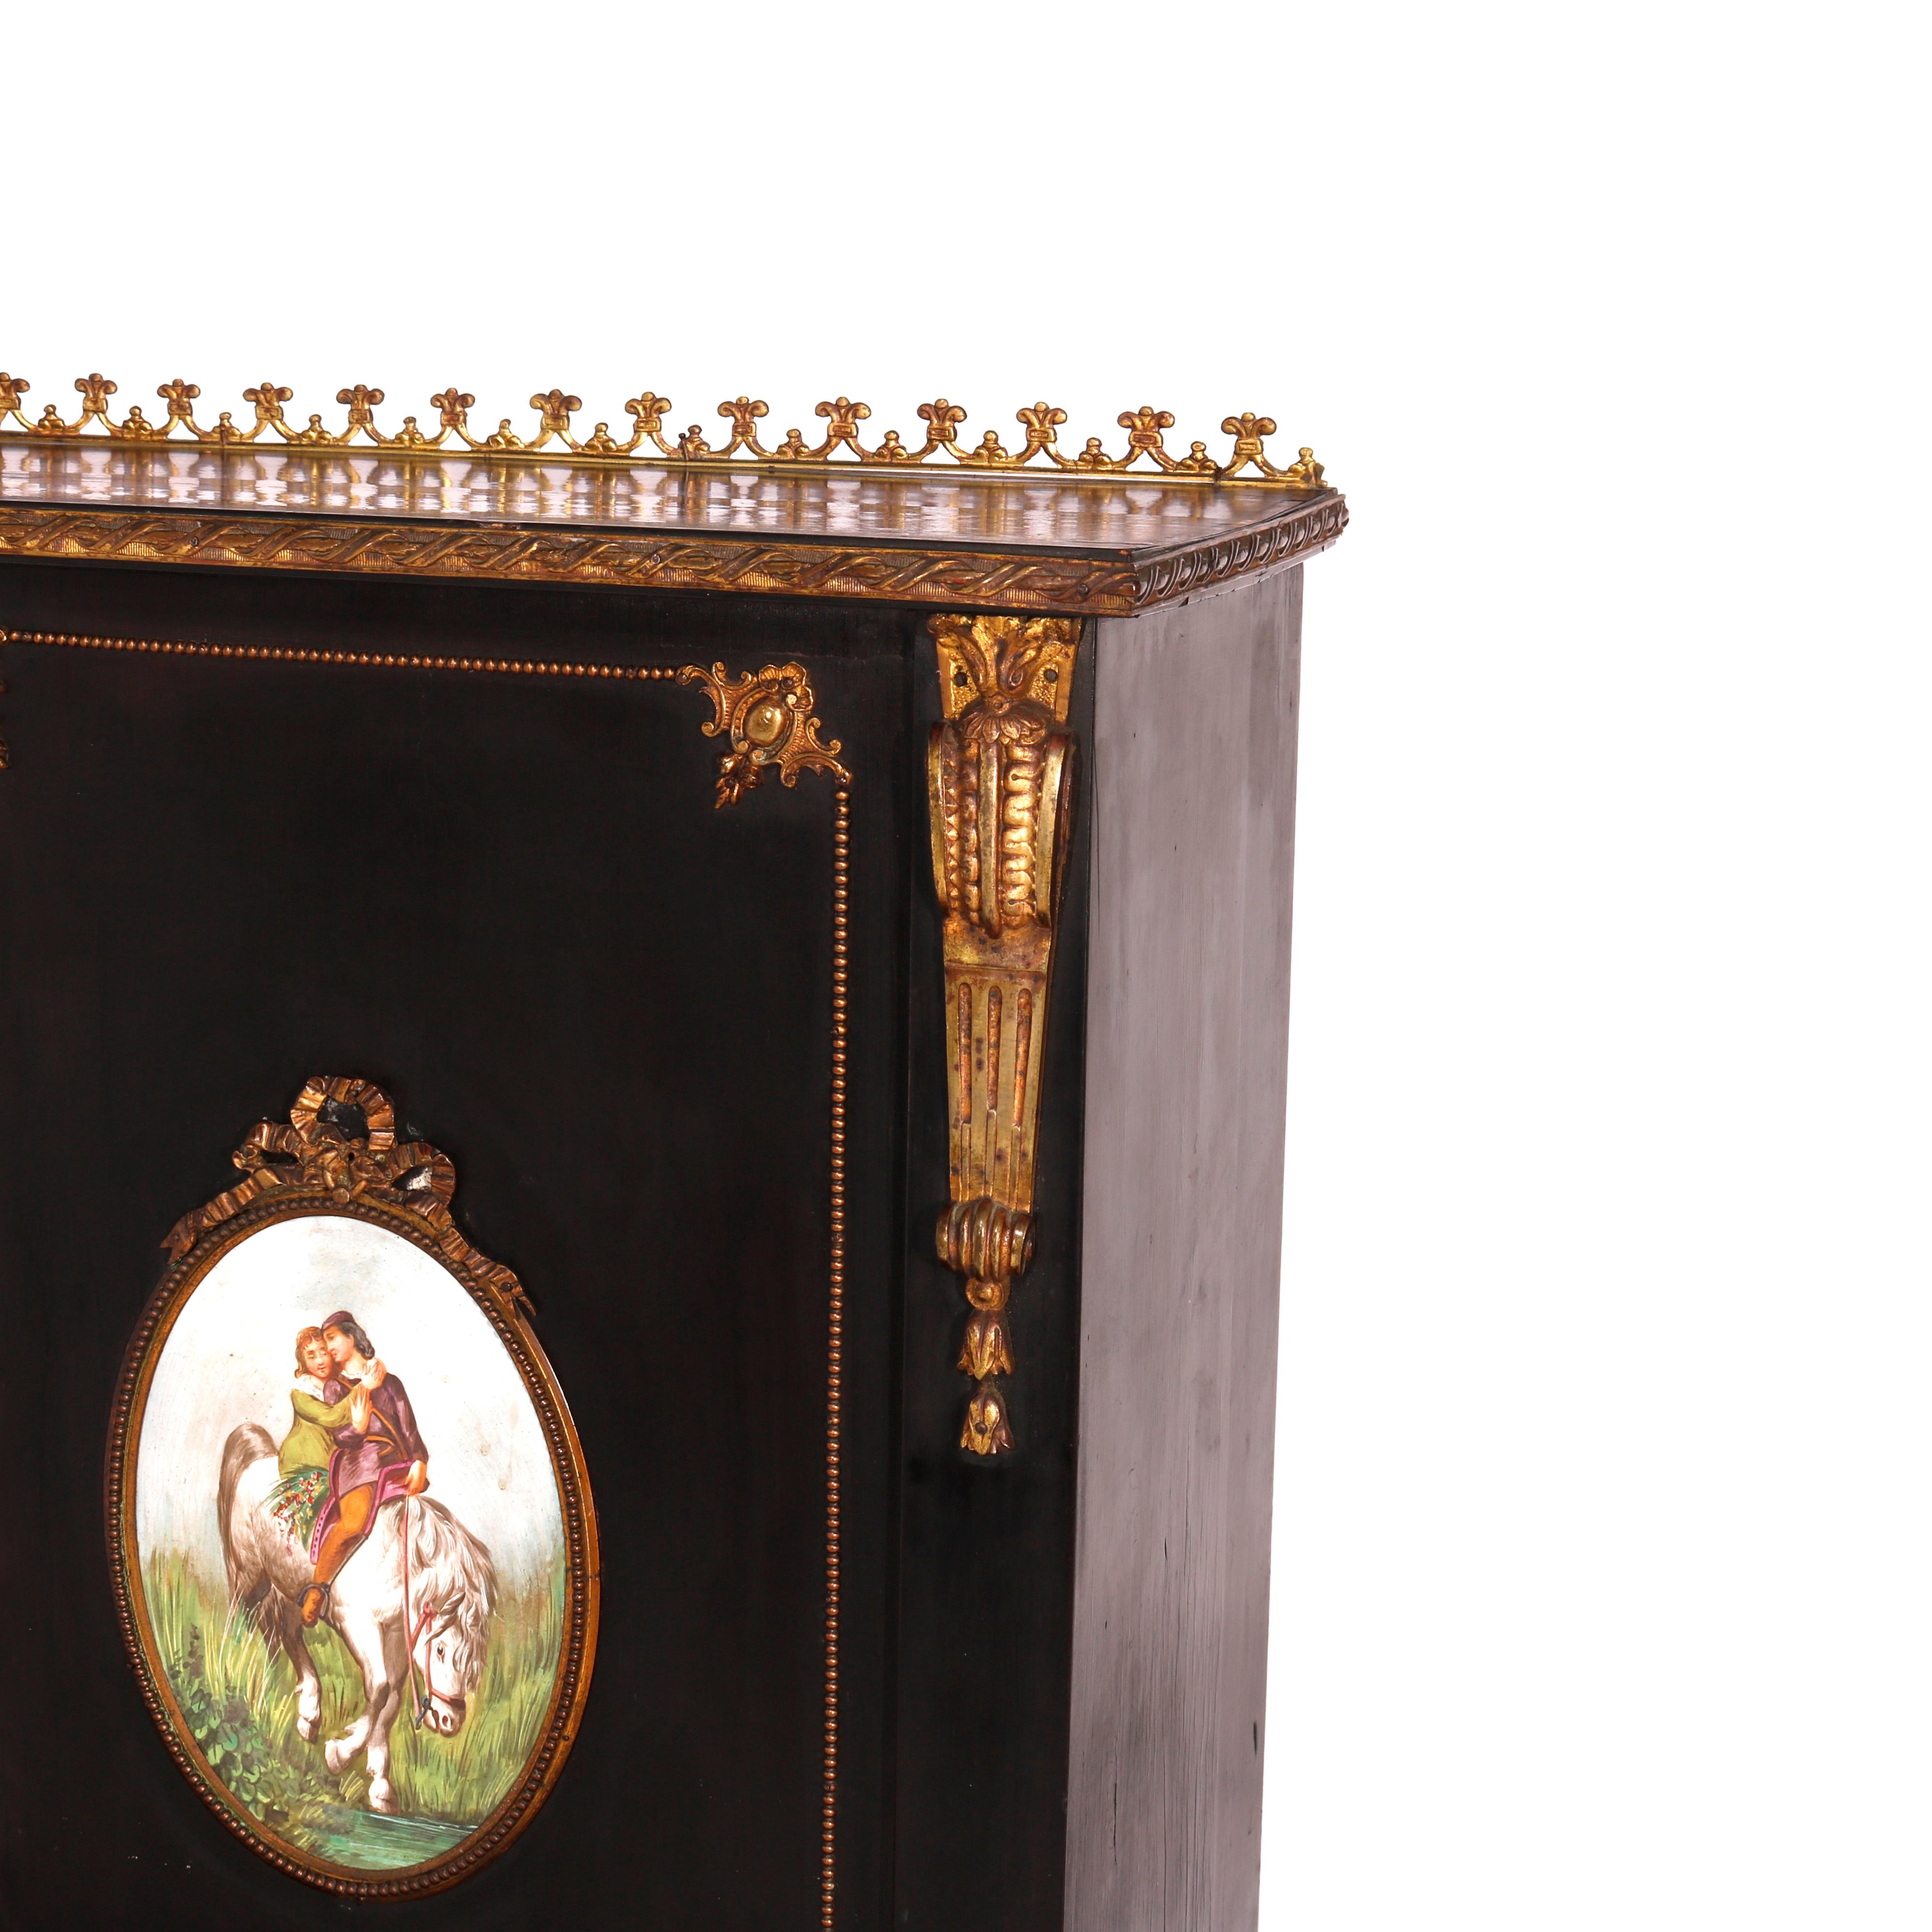 An antique French ladies desk offers ebonized finish with upper ormolu gallery over double door case having painted porcelain plaque insets and gilt decoration, fold out writing surface and raised on tapered legs, circa 1890

Measures - 52.5